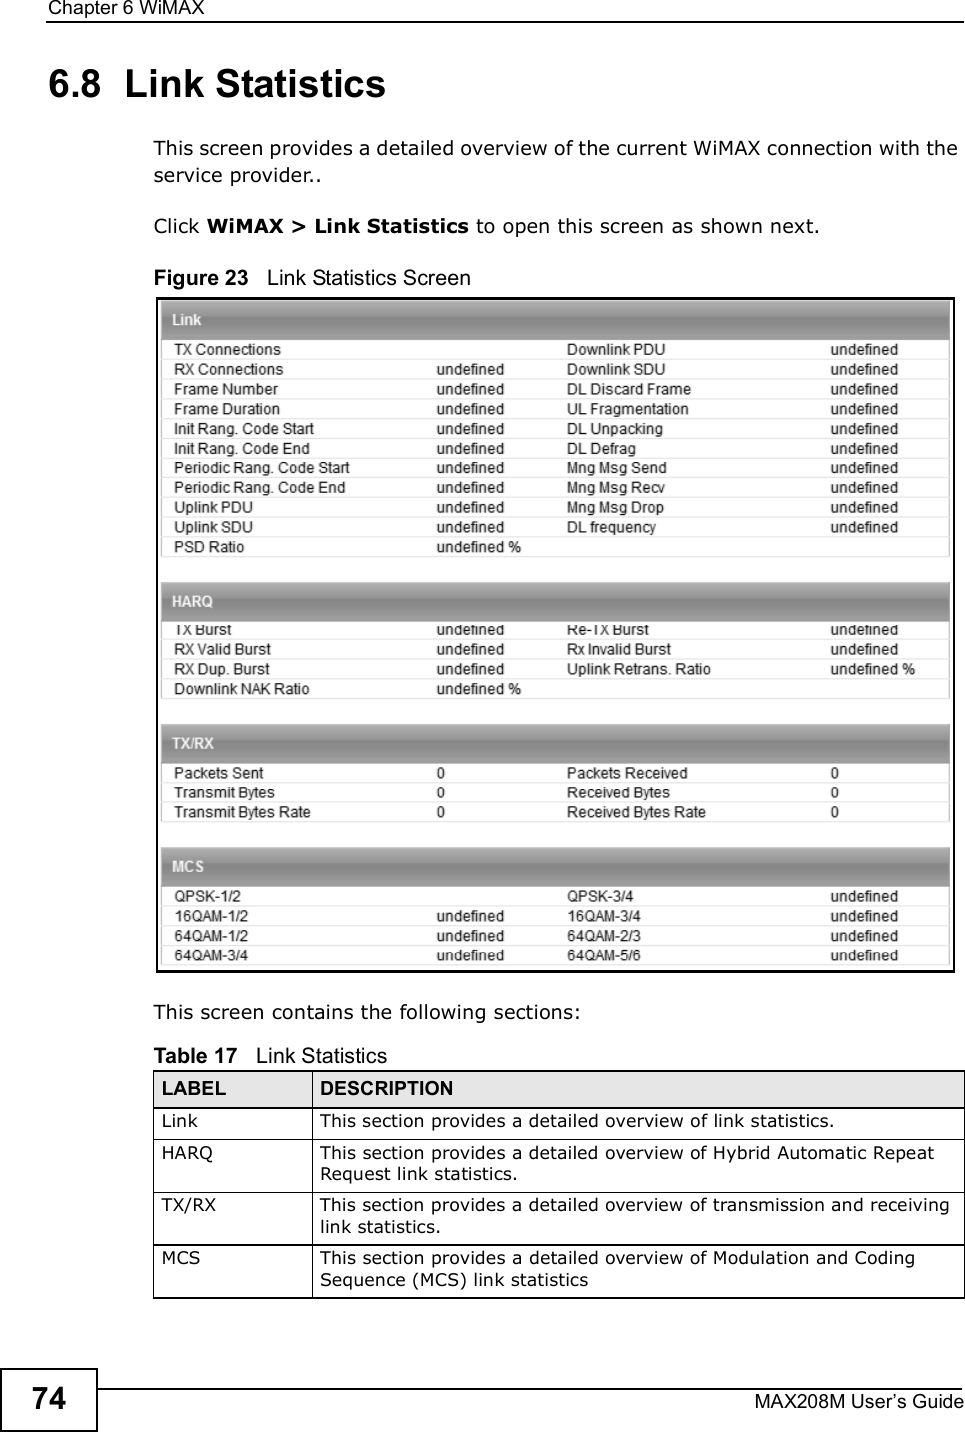 Chapter 6WiMAXMAX208M User s Guide746.8  Link StatisticsThis screen provides a detailed overview of the current WiMAX connection with the service provider..Click WiMAX &gt; Link Statistics to open this screen as shown next.Figure 23   Link Statistics ScreenThis screen contains the following sections:Table 17   Link StatisticsLABEL DESCRIPTIONLinkThis section provides a detailed overview of link statistics.HARQThis section provides a detailed overview of Hybrid Automatic Repeat Request link statistics.TX/RXThis section provides a detailed overview of transmission and receiving link statistics.MCSThis section provides a detailed overview of Modulation and Coding Sequence (MCS) link statistics